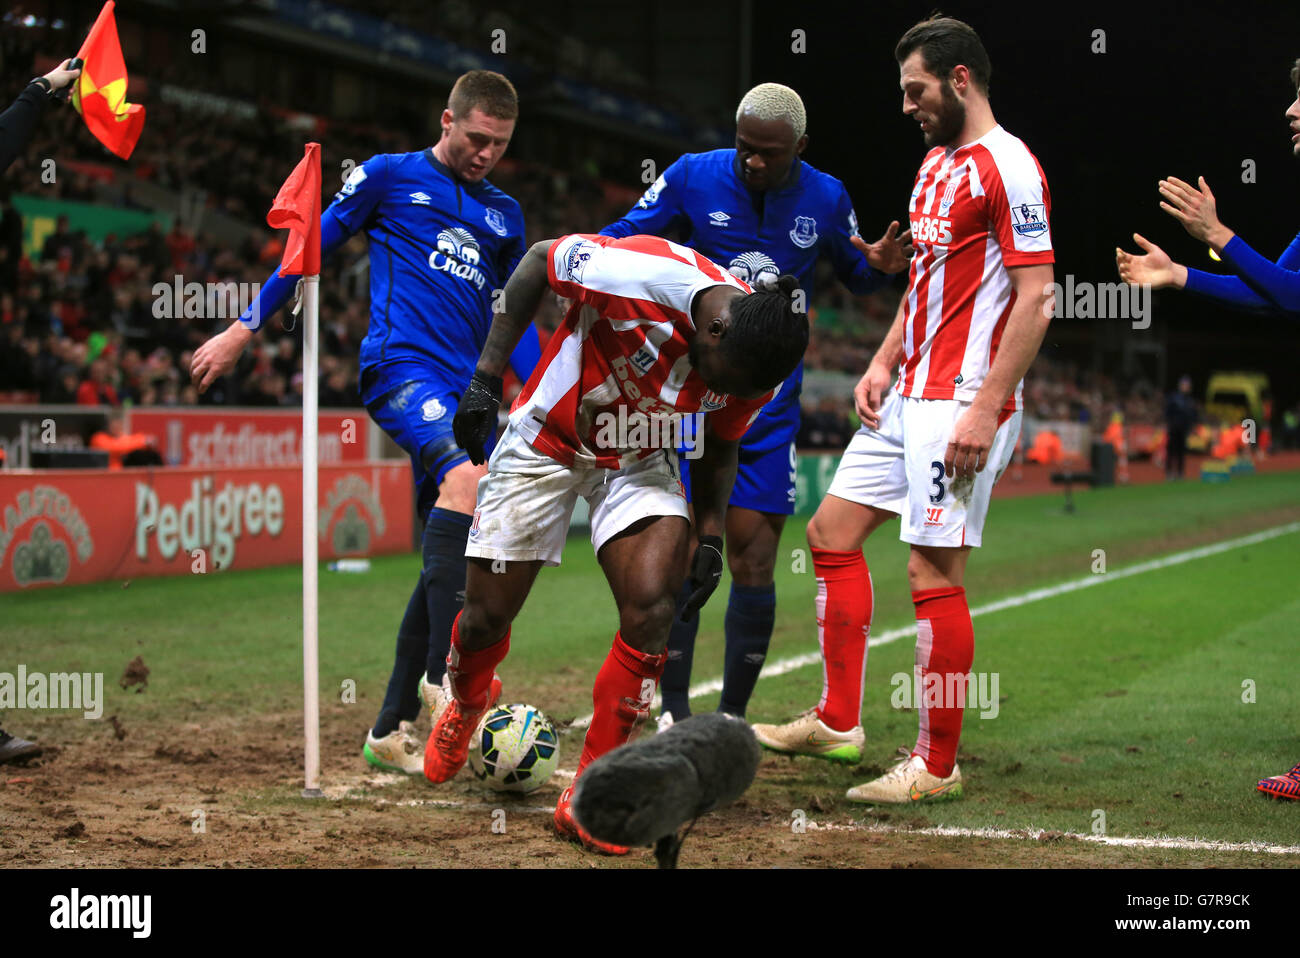 Stoke City's Victor Moses (centre) protects the ball in the corner from Everton's James McCarthy (left) and Arouna Kone during the Barclays Premier League match at the Britannia Stadium, Stoke. Stock Photo